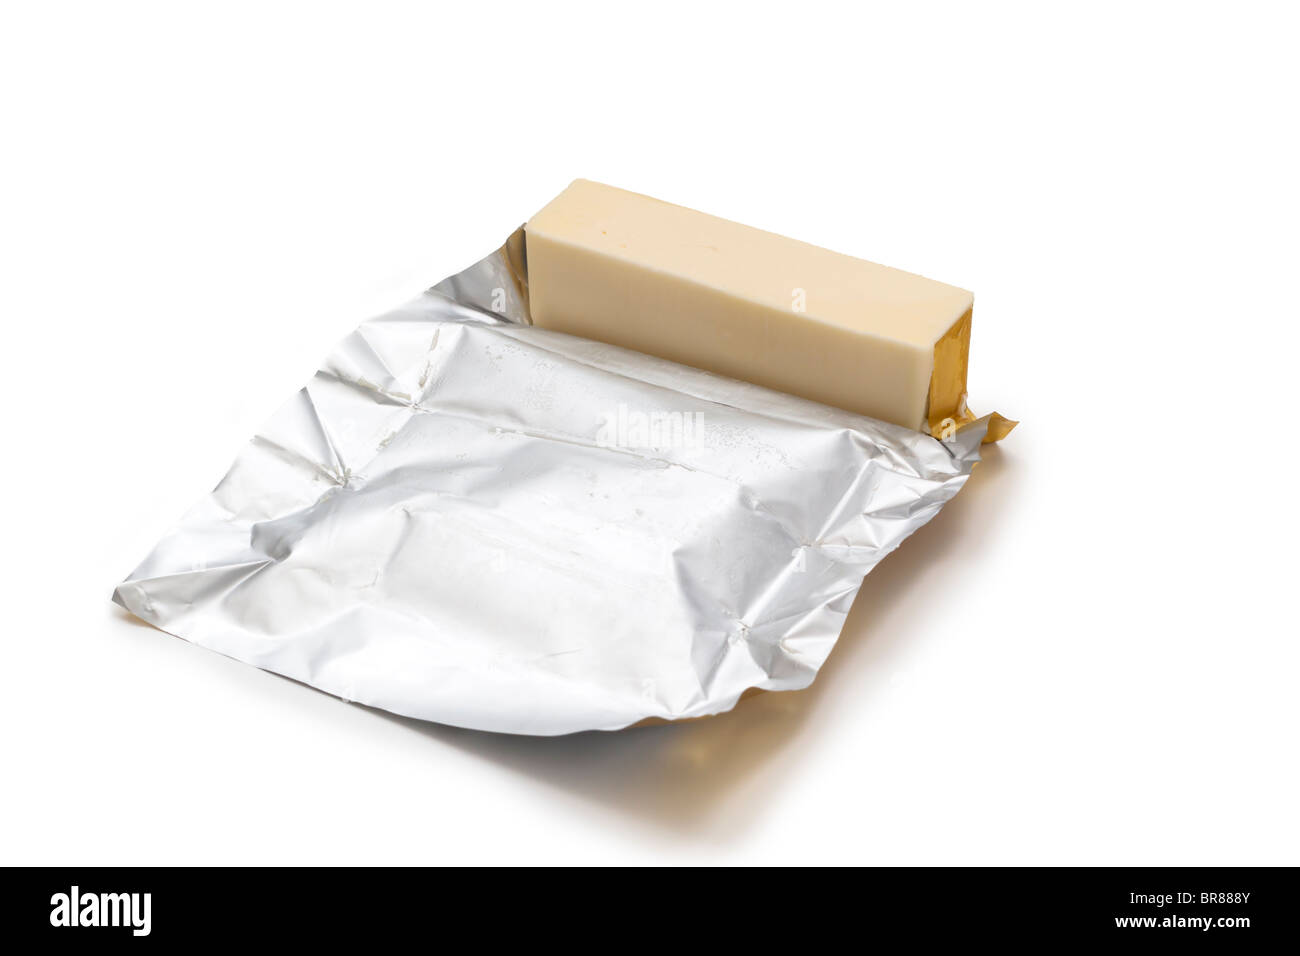 Stick of butter with foil wrapping Stock Photo